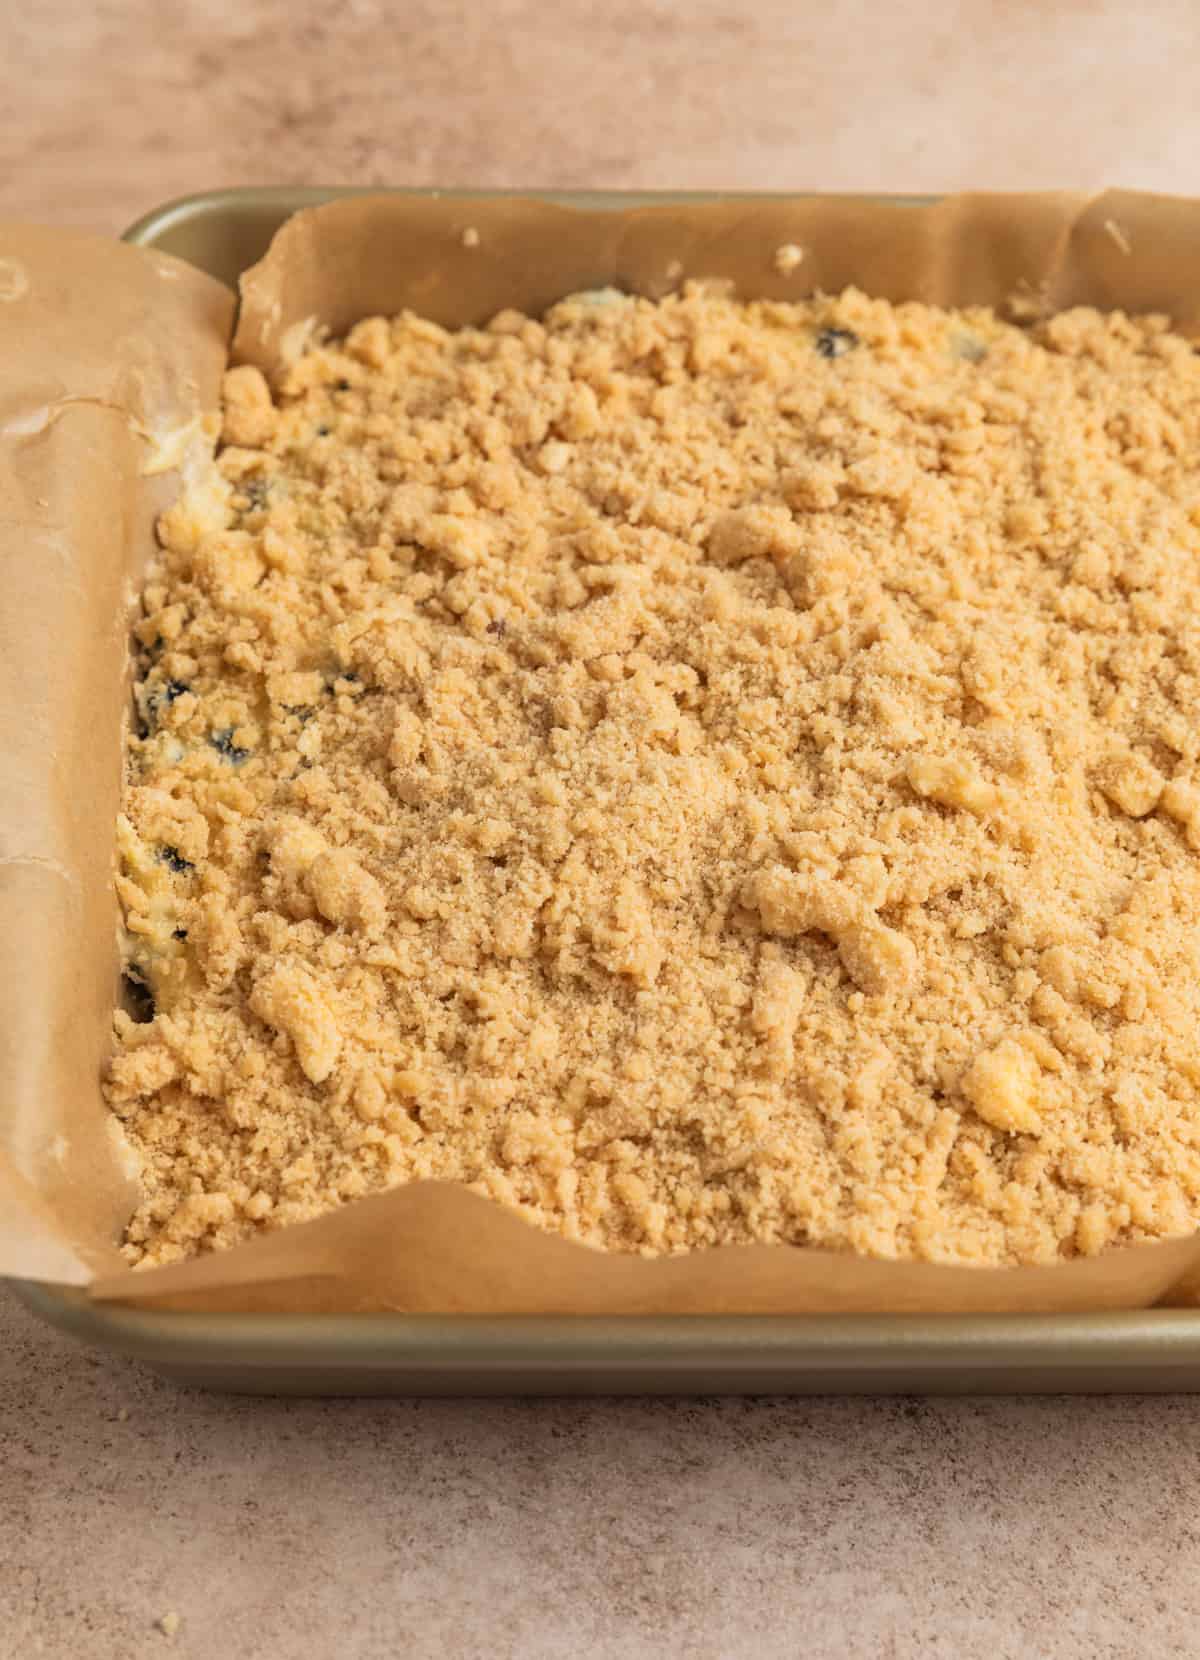 Streusel added to top of coffee cake batter in pan.